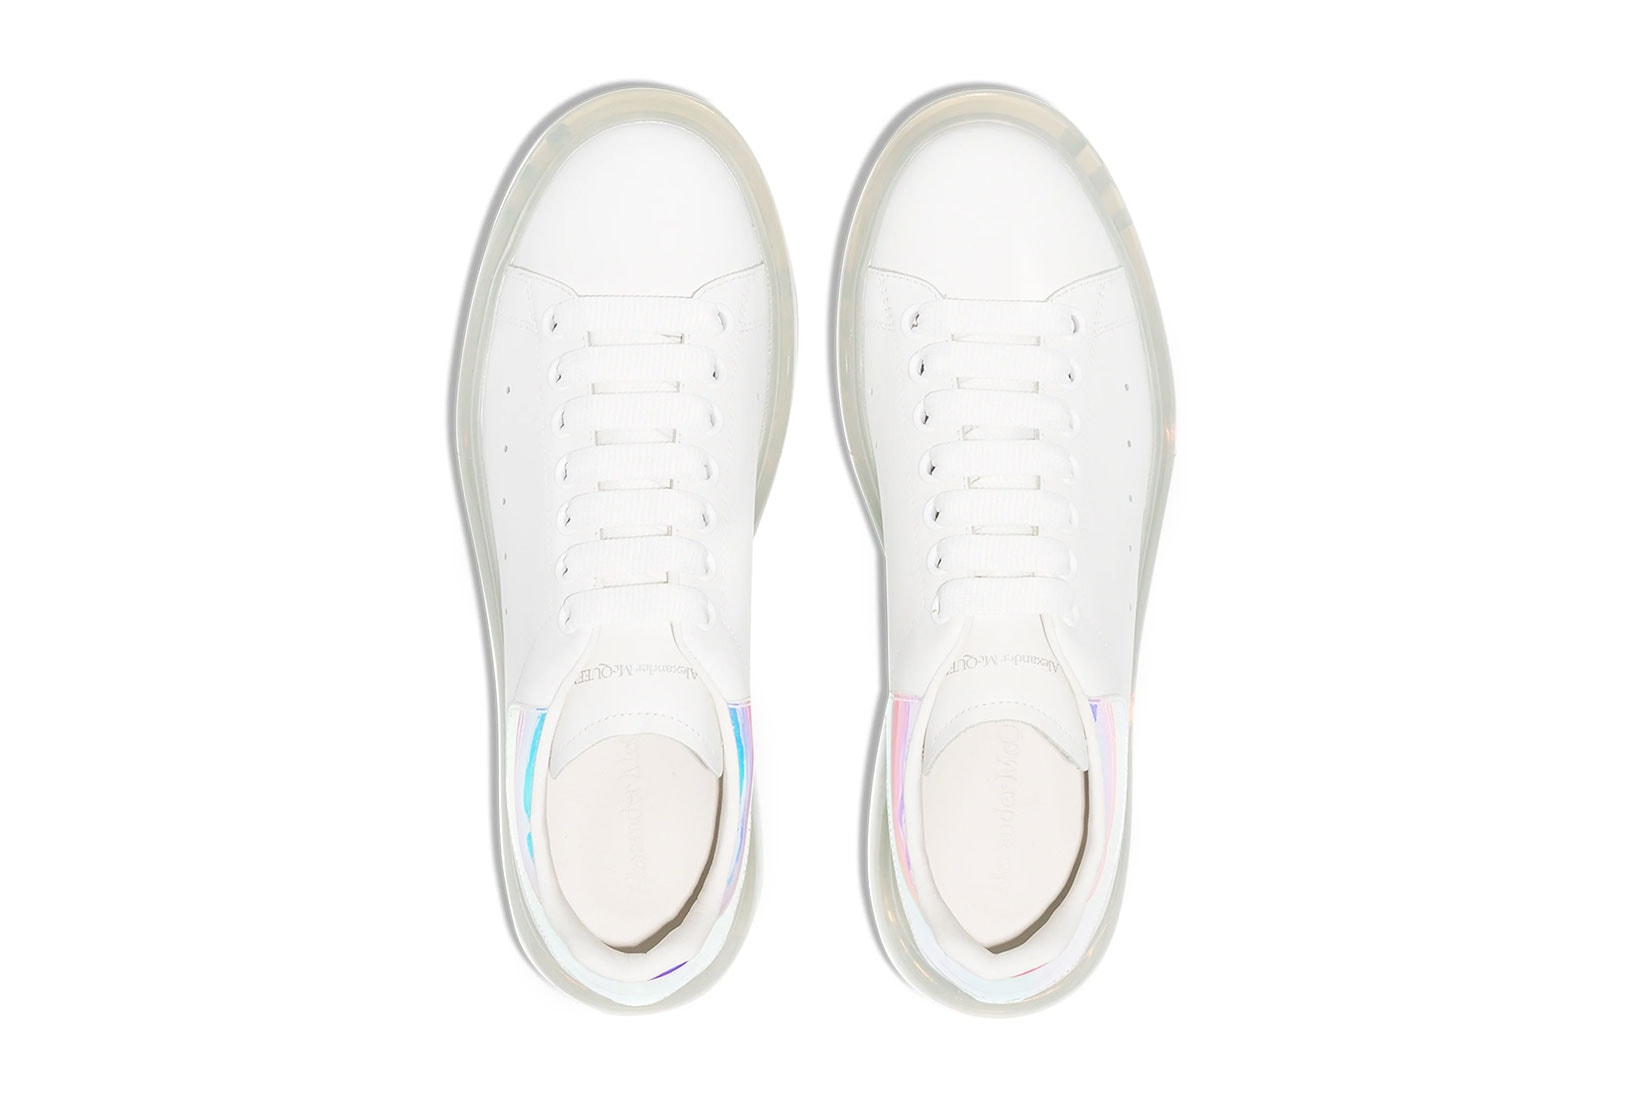 alexander mcqueen oversized womens sneakers shoes white clear iridescent sarah burton